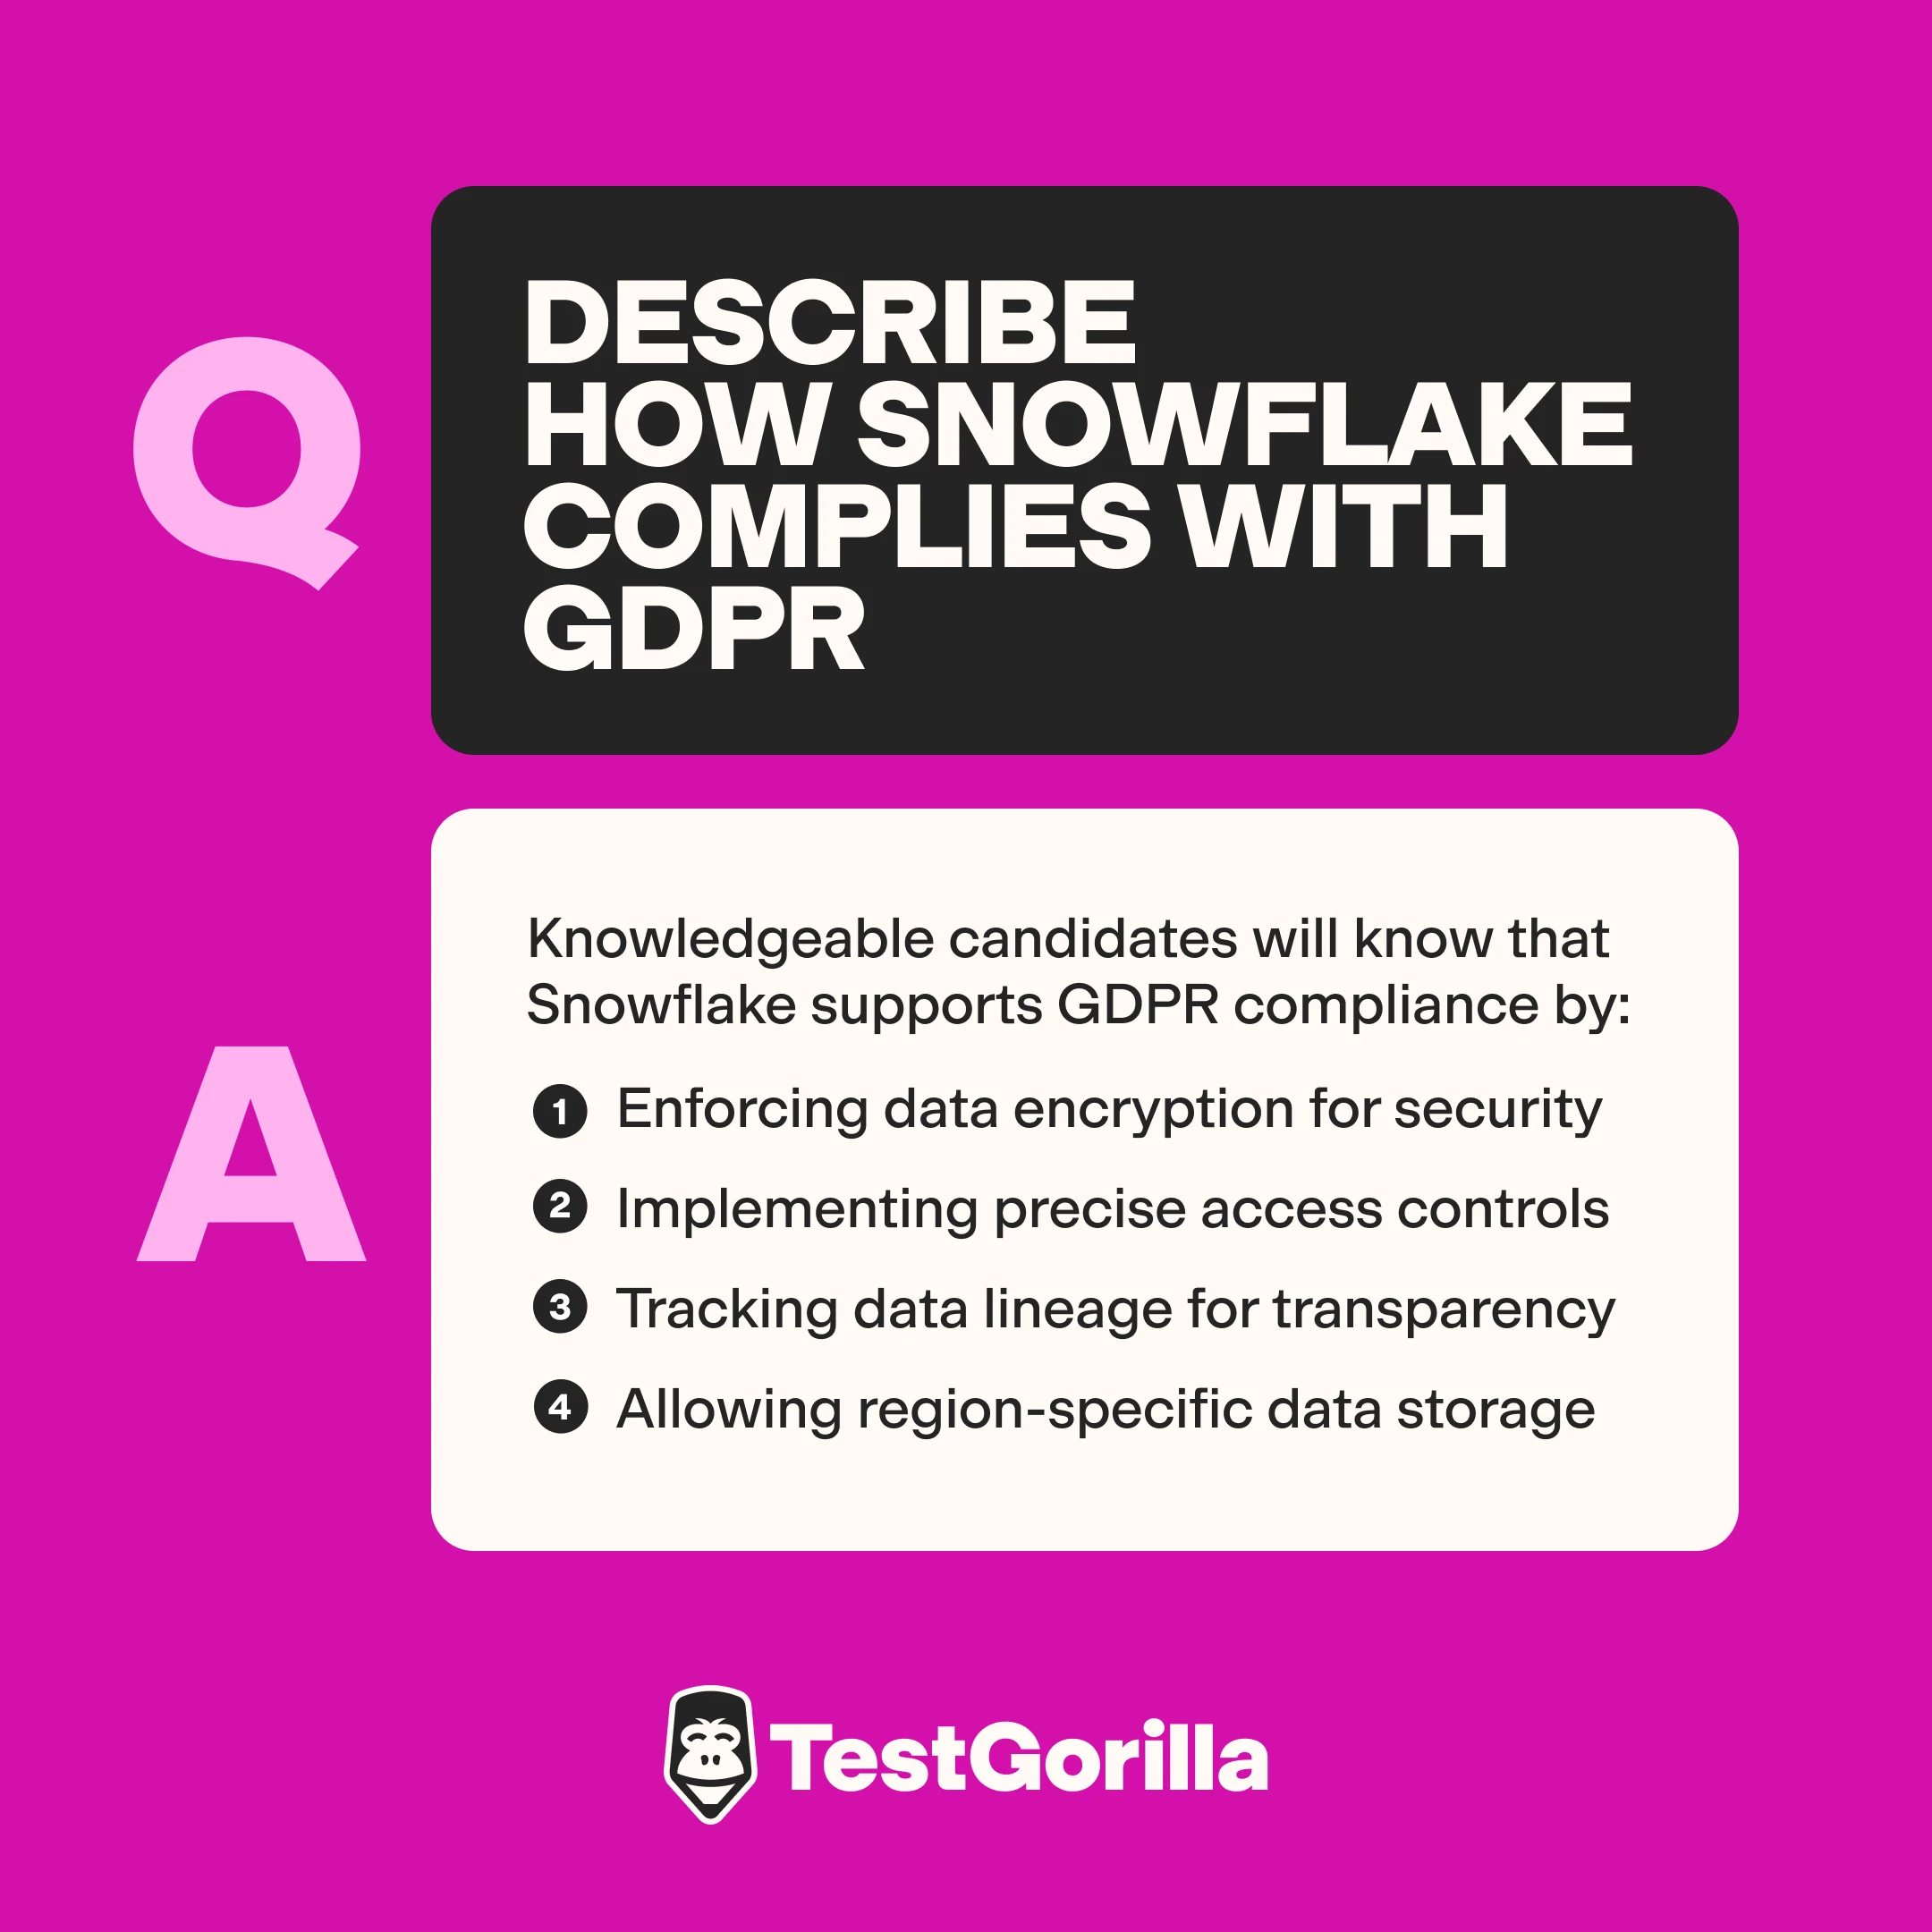 Describe how Snowflake complies with GDPR graphic